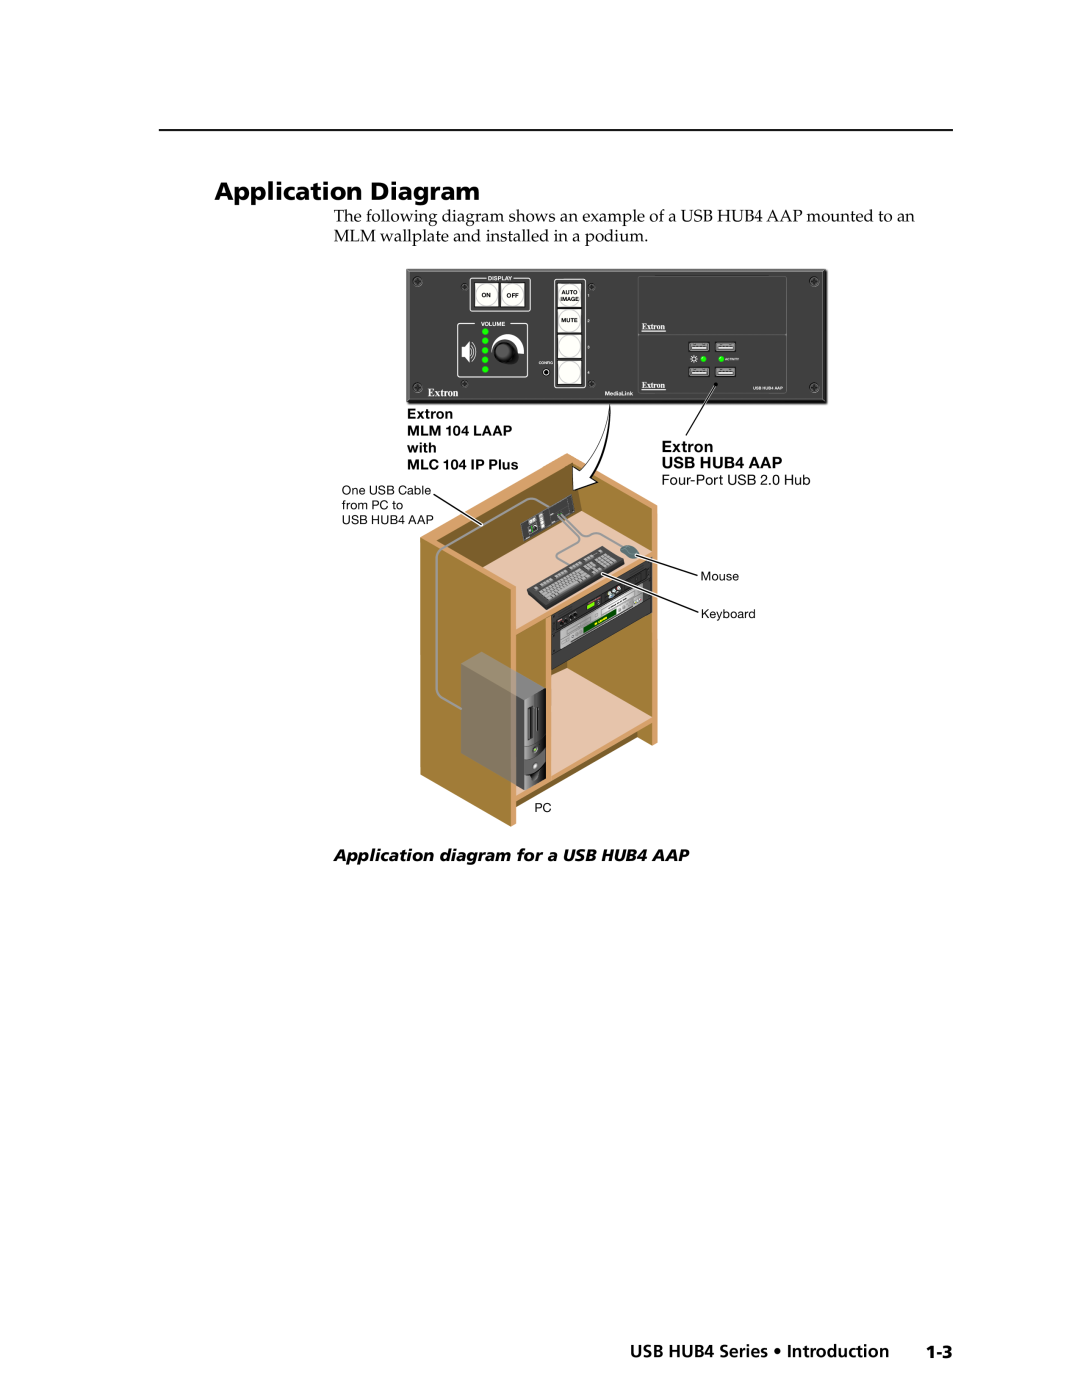 Extron electronic Application Diagram, Application diagram for a USB HUB4 AAP, USB HUB4 Series Introduction, Extron 